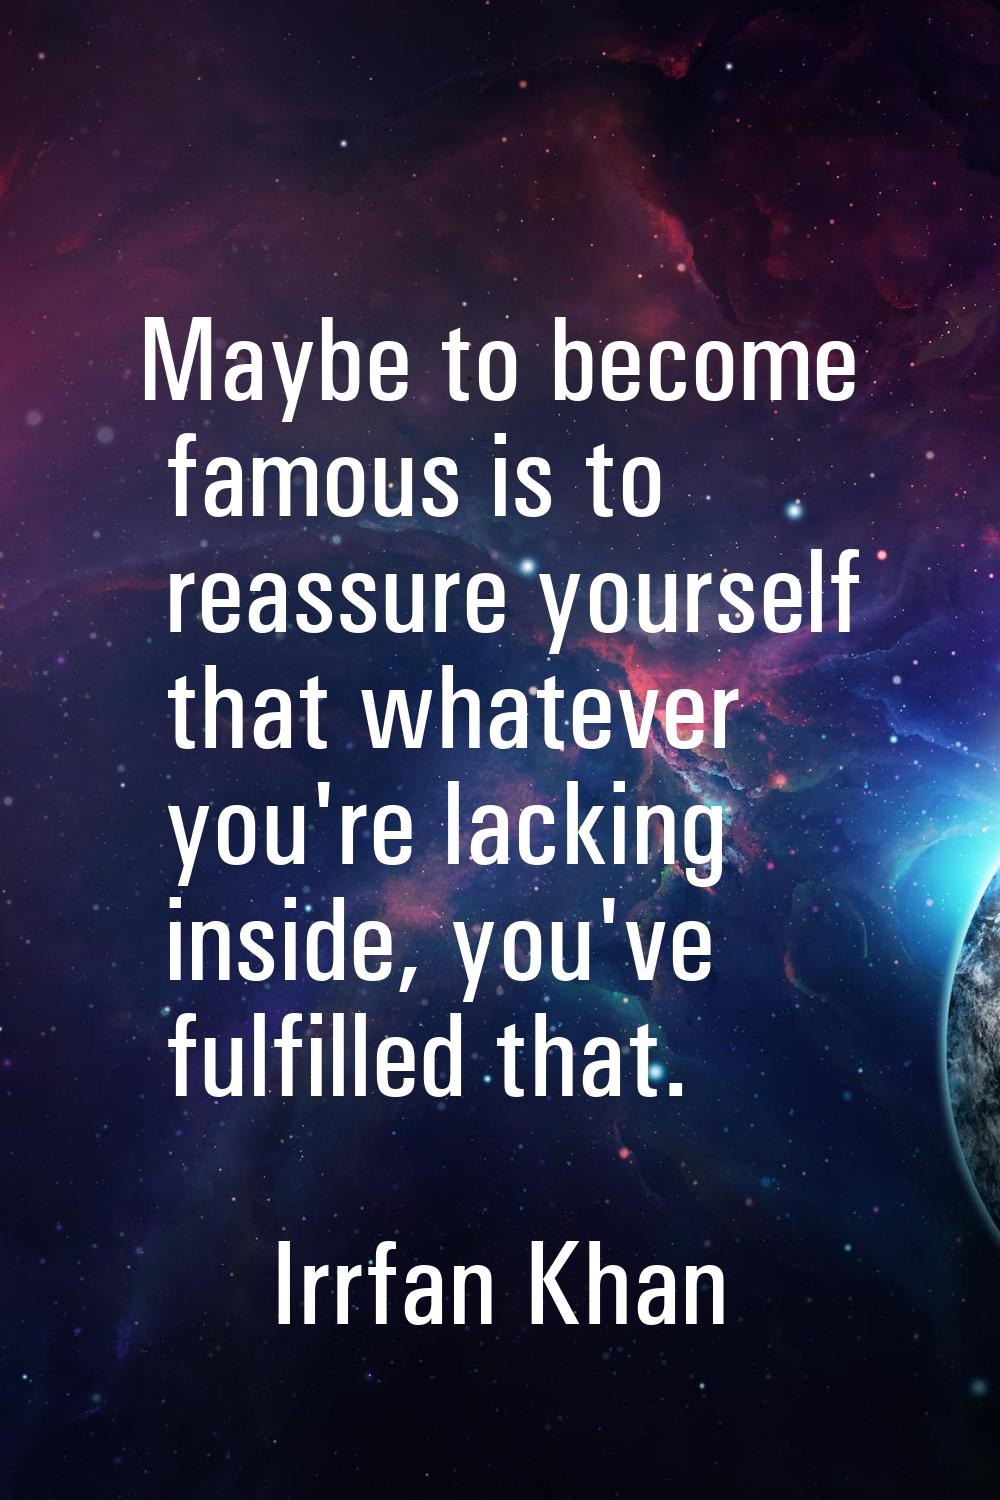 Maybe to become famous is to reassure yourself that whatever you're lacking inside, you've fulfille